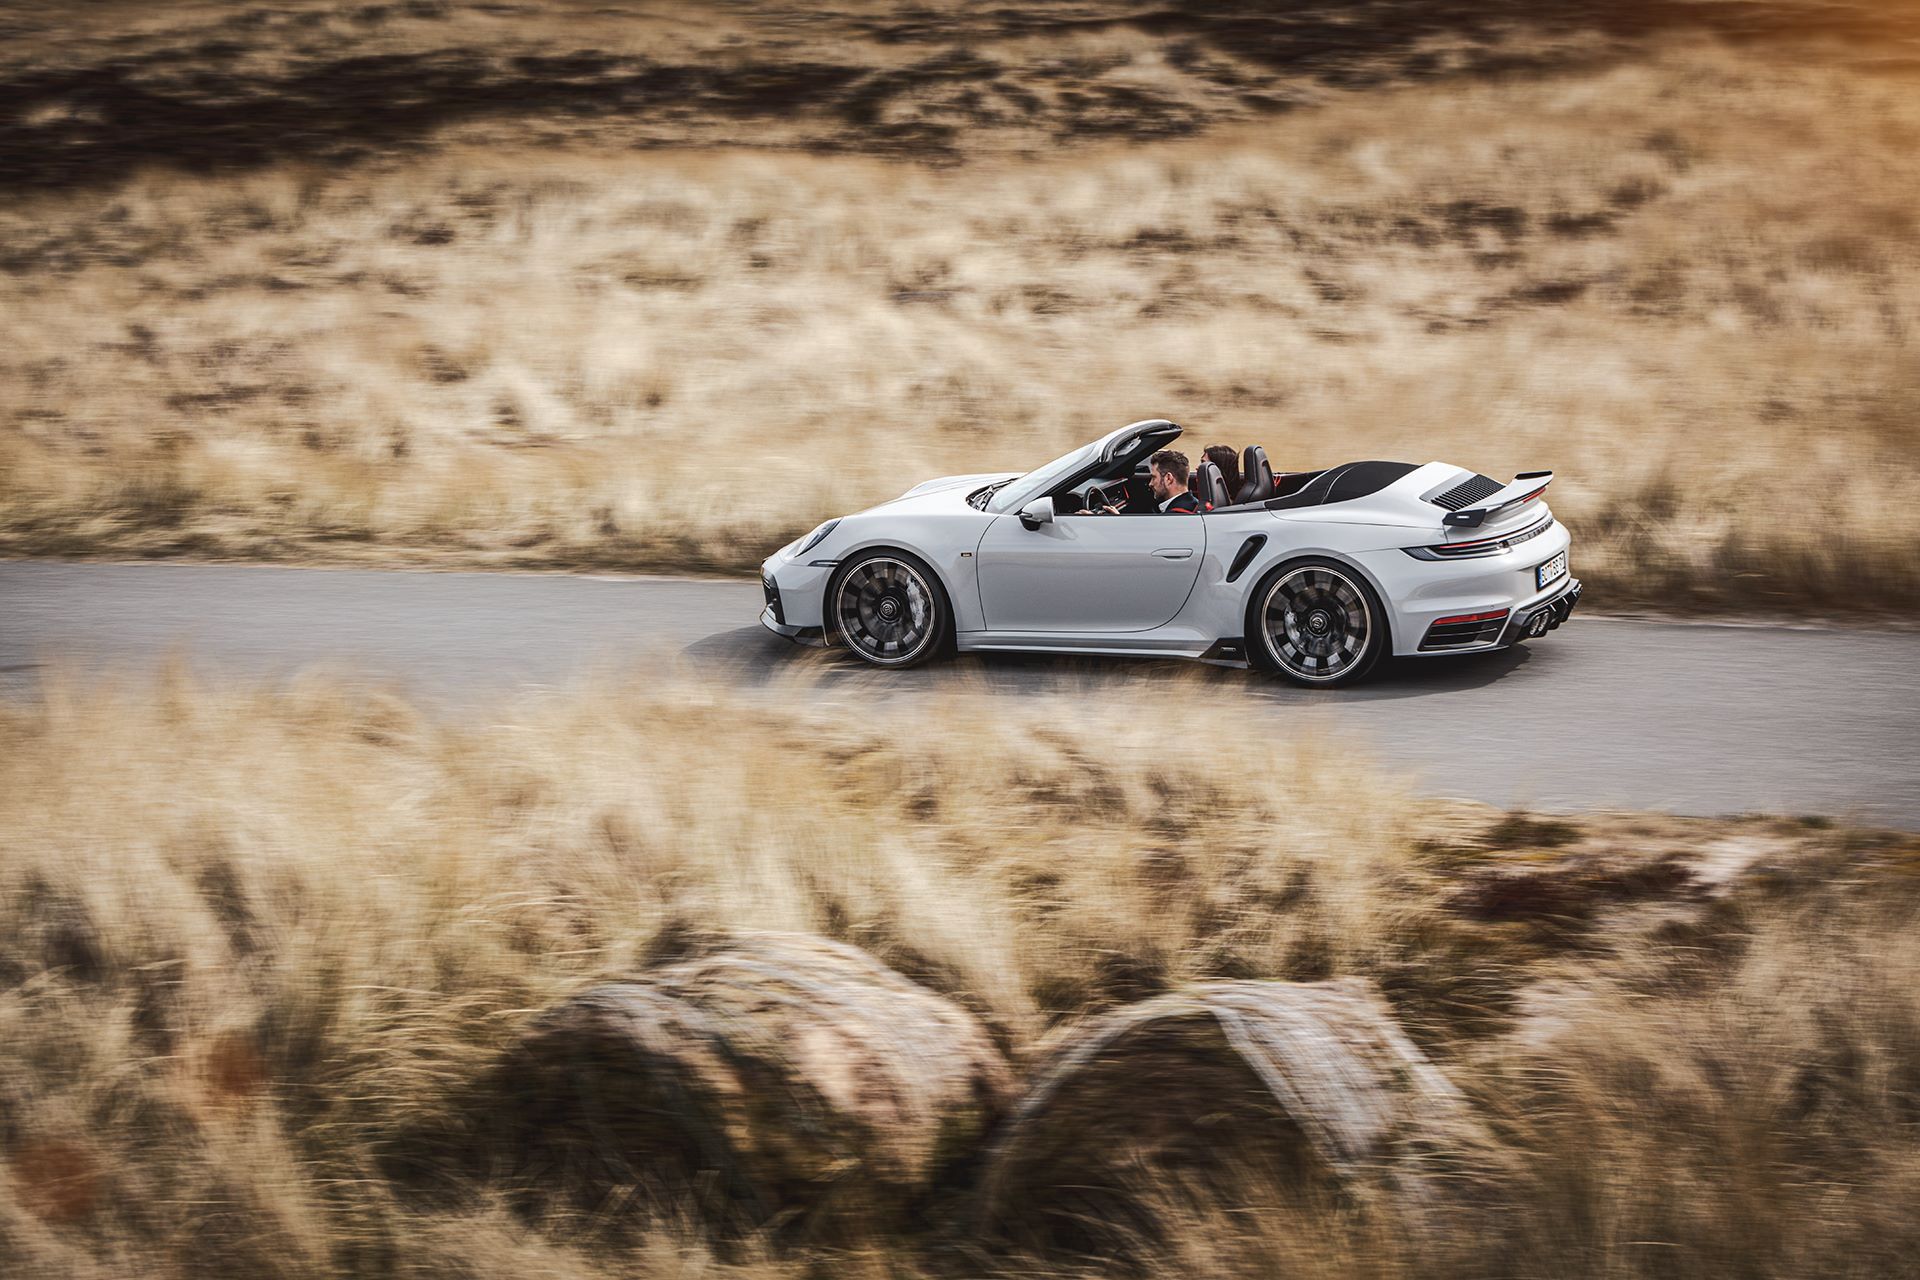 BRABUS-820-based-on-911-Turbo-S-Cabriolet-Outdoor-7